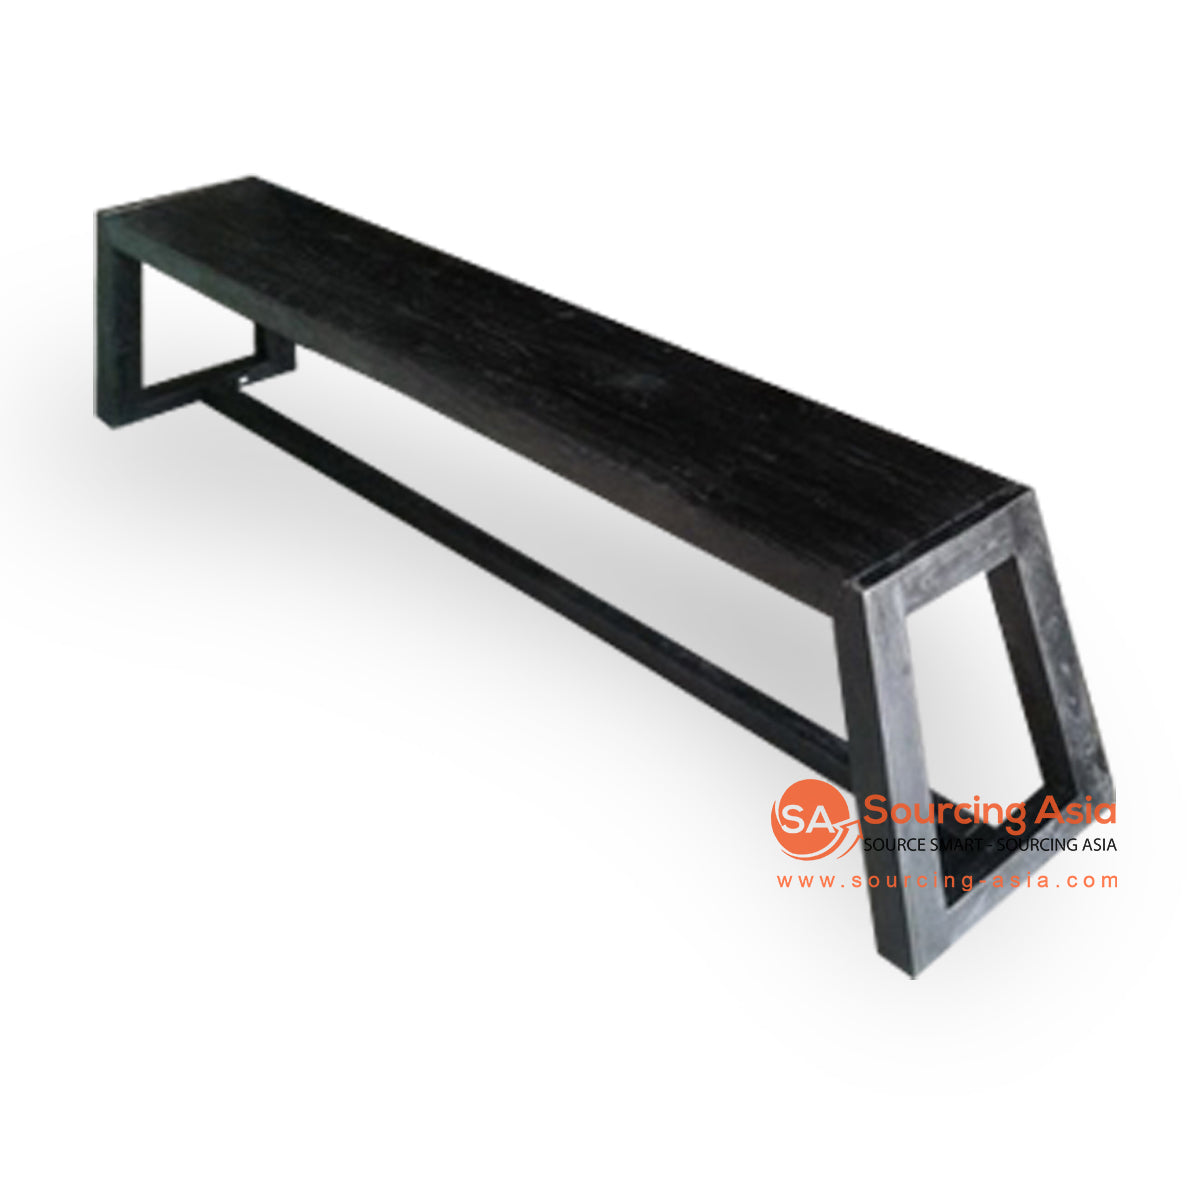 ECL061 BLACK RECYCLED TEAK WOOD BENCH